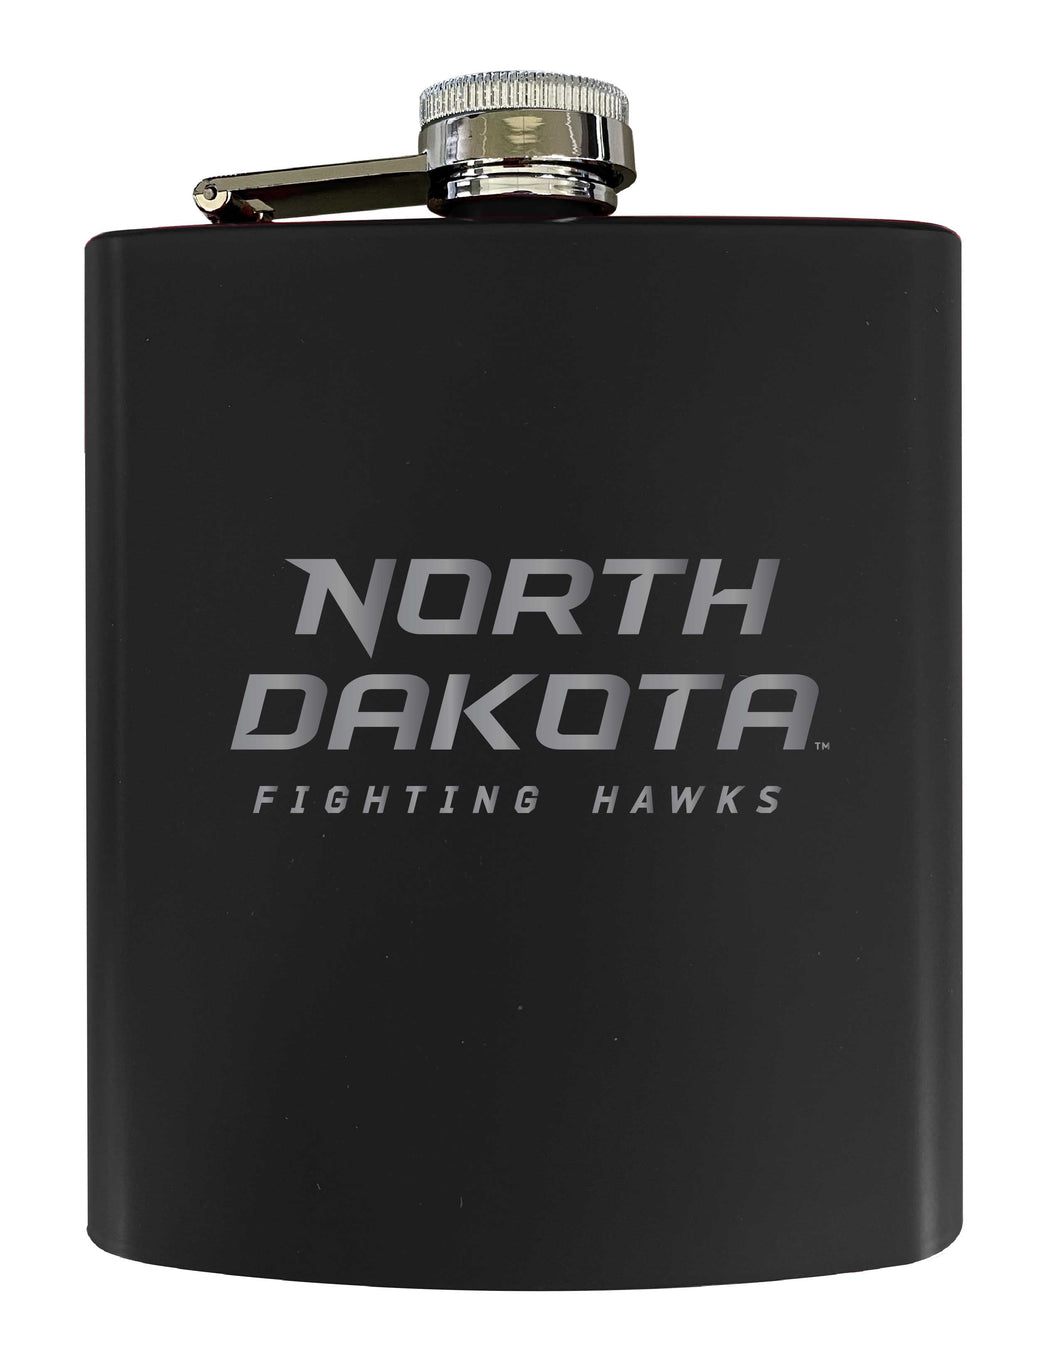 North Dakota Fighting Hawks Stainless Steel Etched Flask 7 oz - Officially Licensed, Choose Your Color, Matte Finish